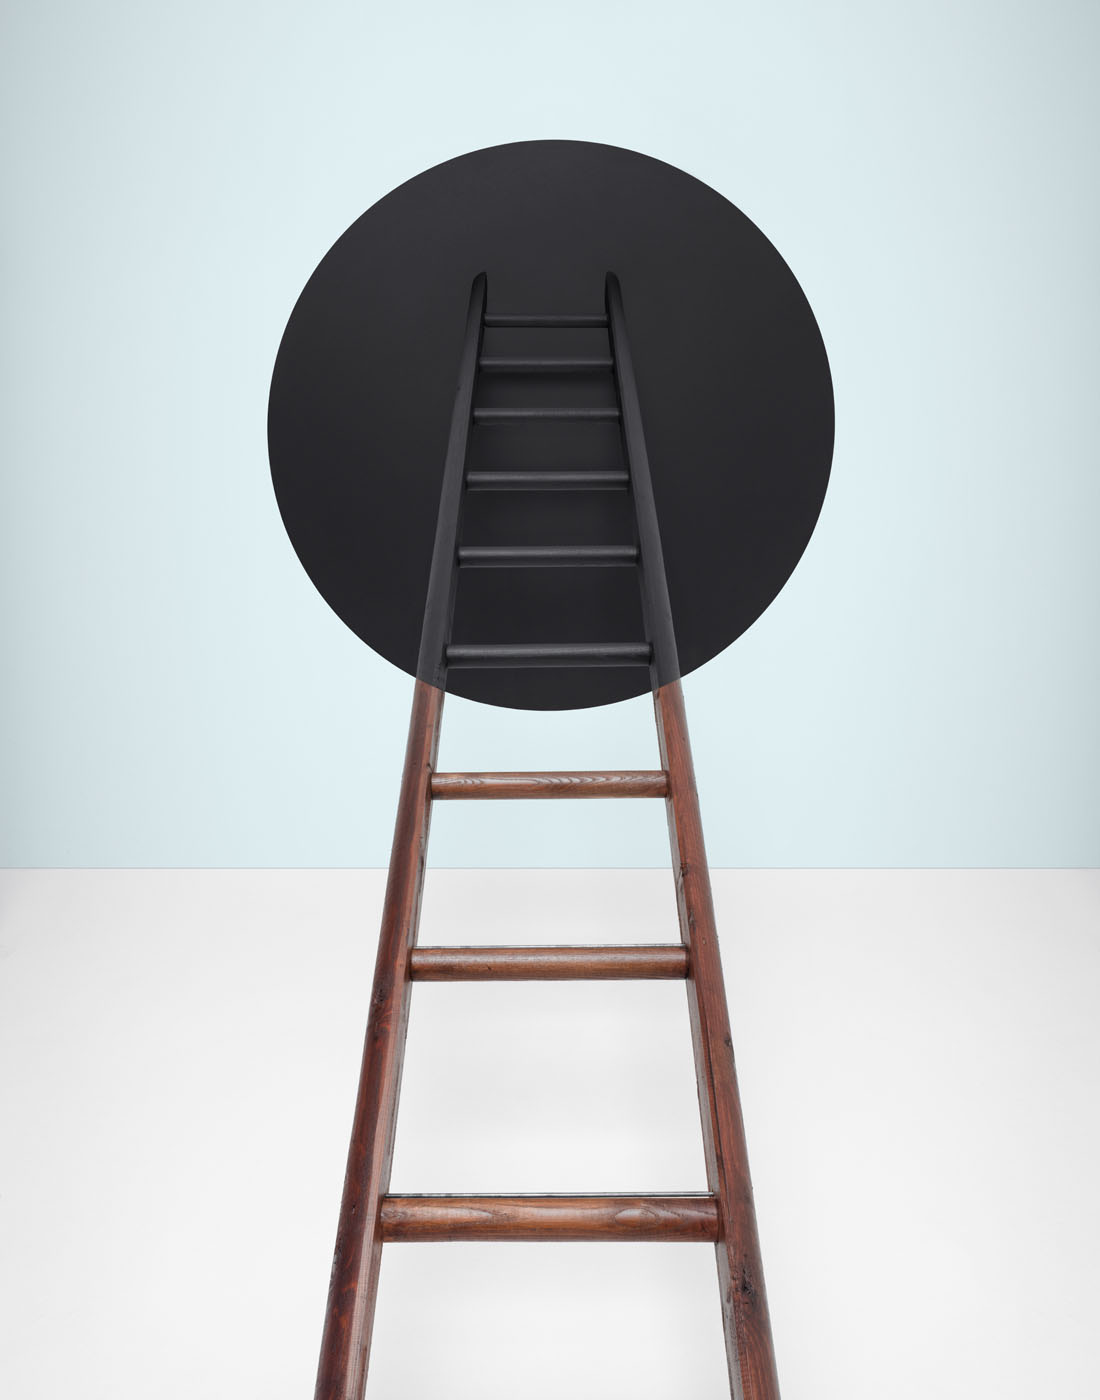 Ladder going into black hole in blue room by Alexander Kent London based still life and product photographer.